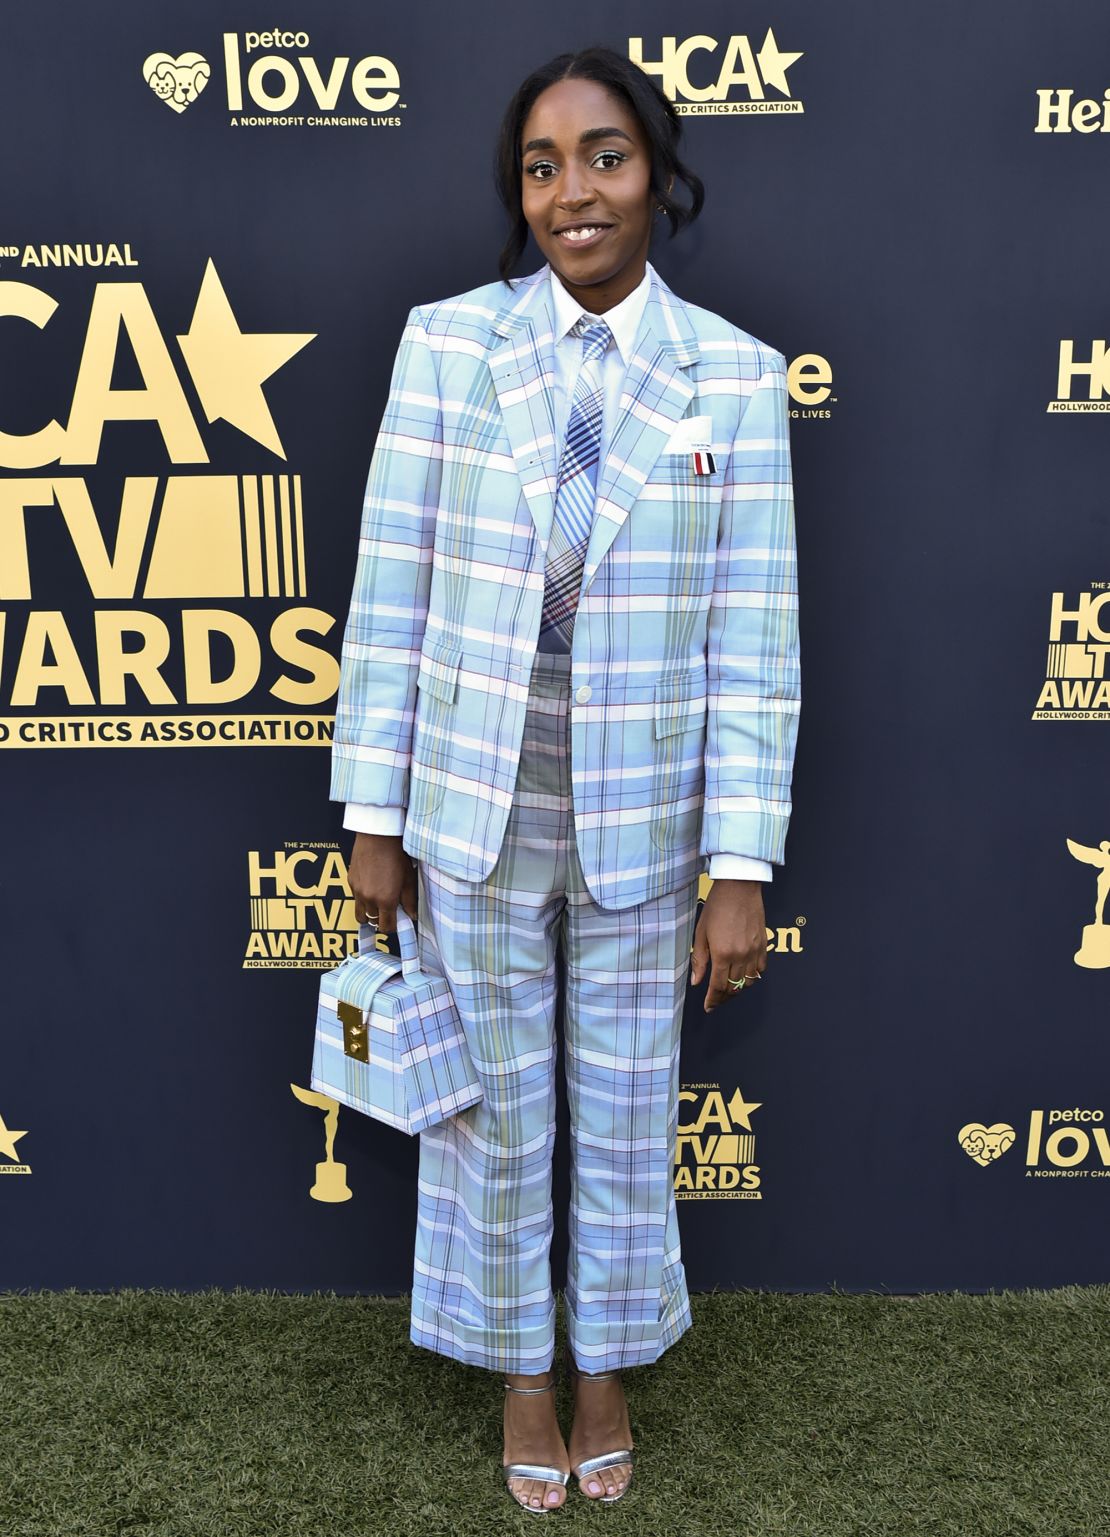 At the HCA TV Awards on August 14, 2022, Edebiri favored suiting again, this time in a relaxed pale blue check two piece with clashing tie by Thom Browne.